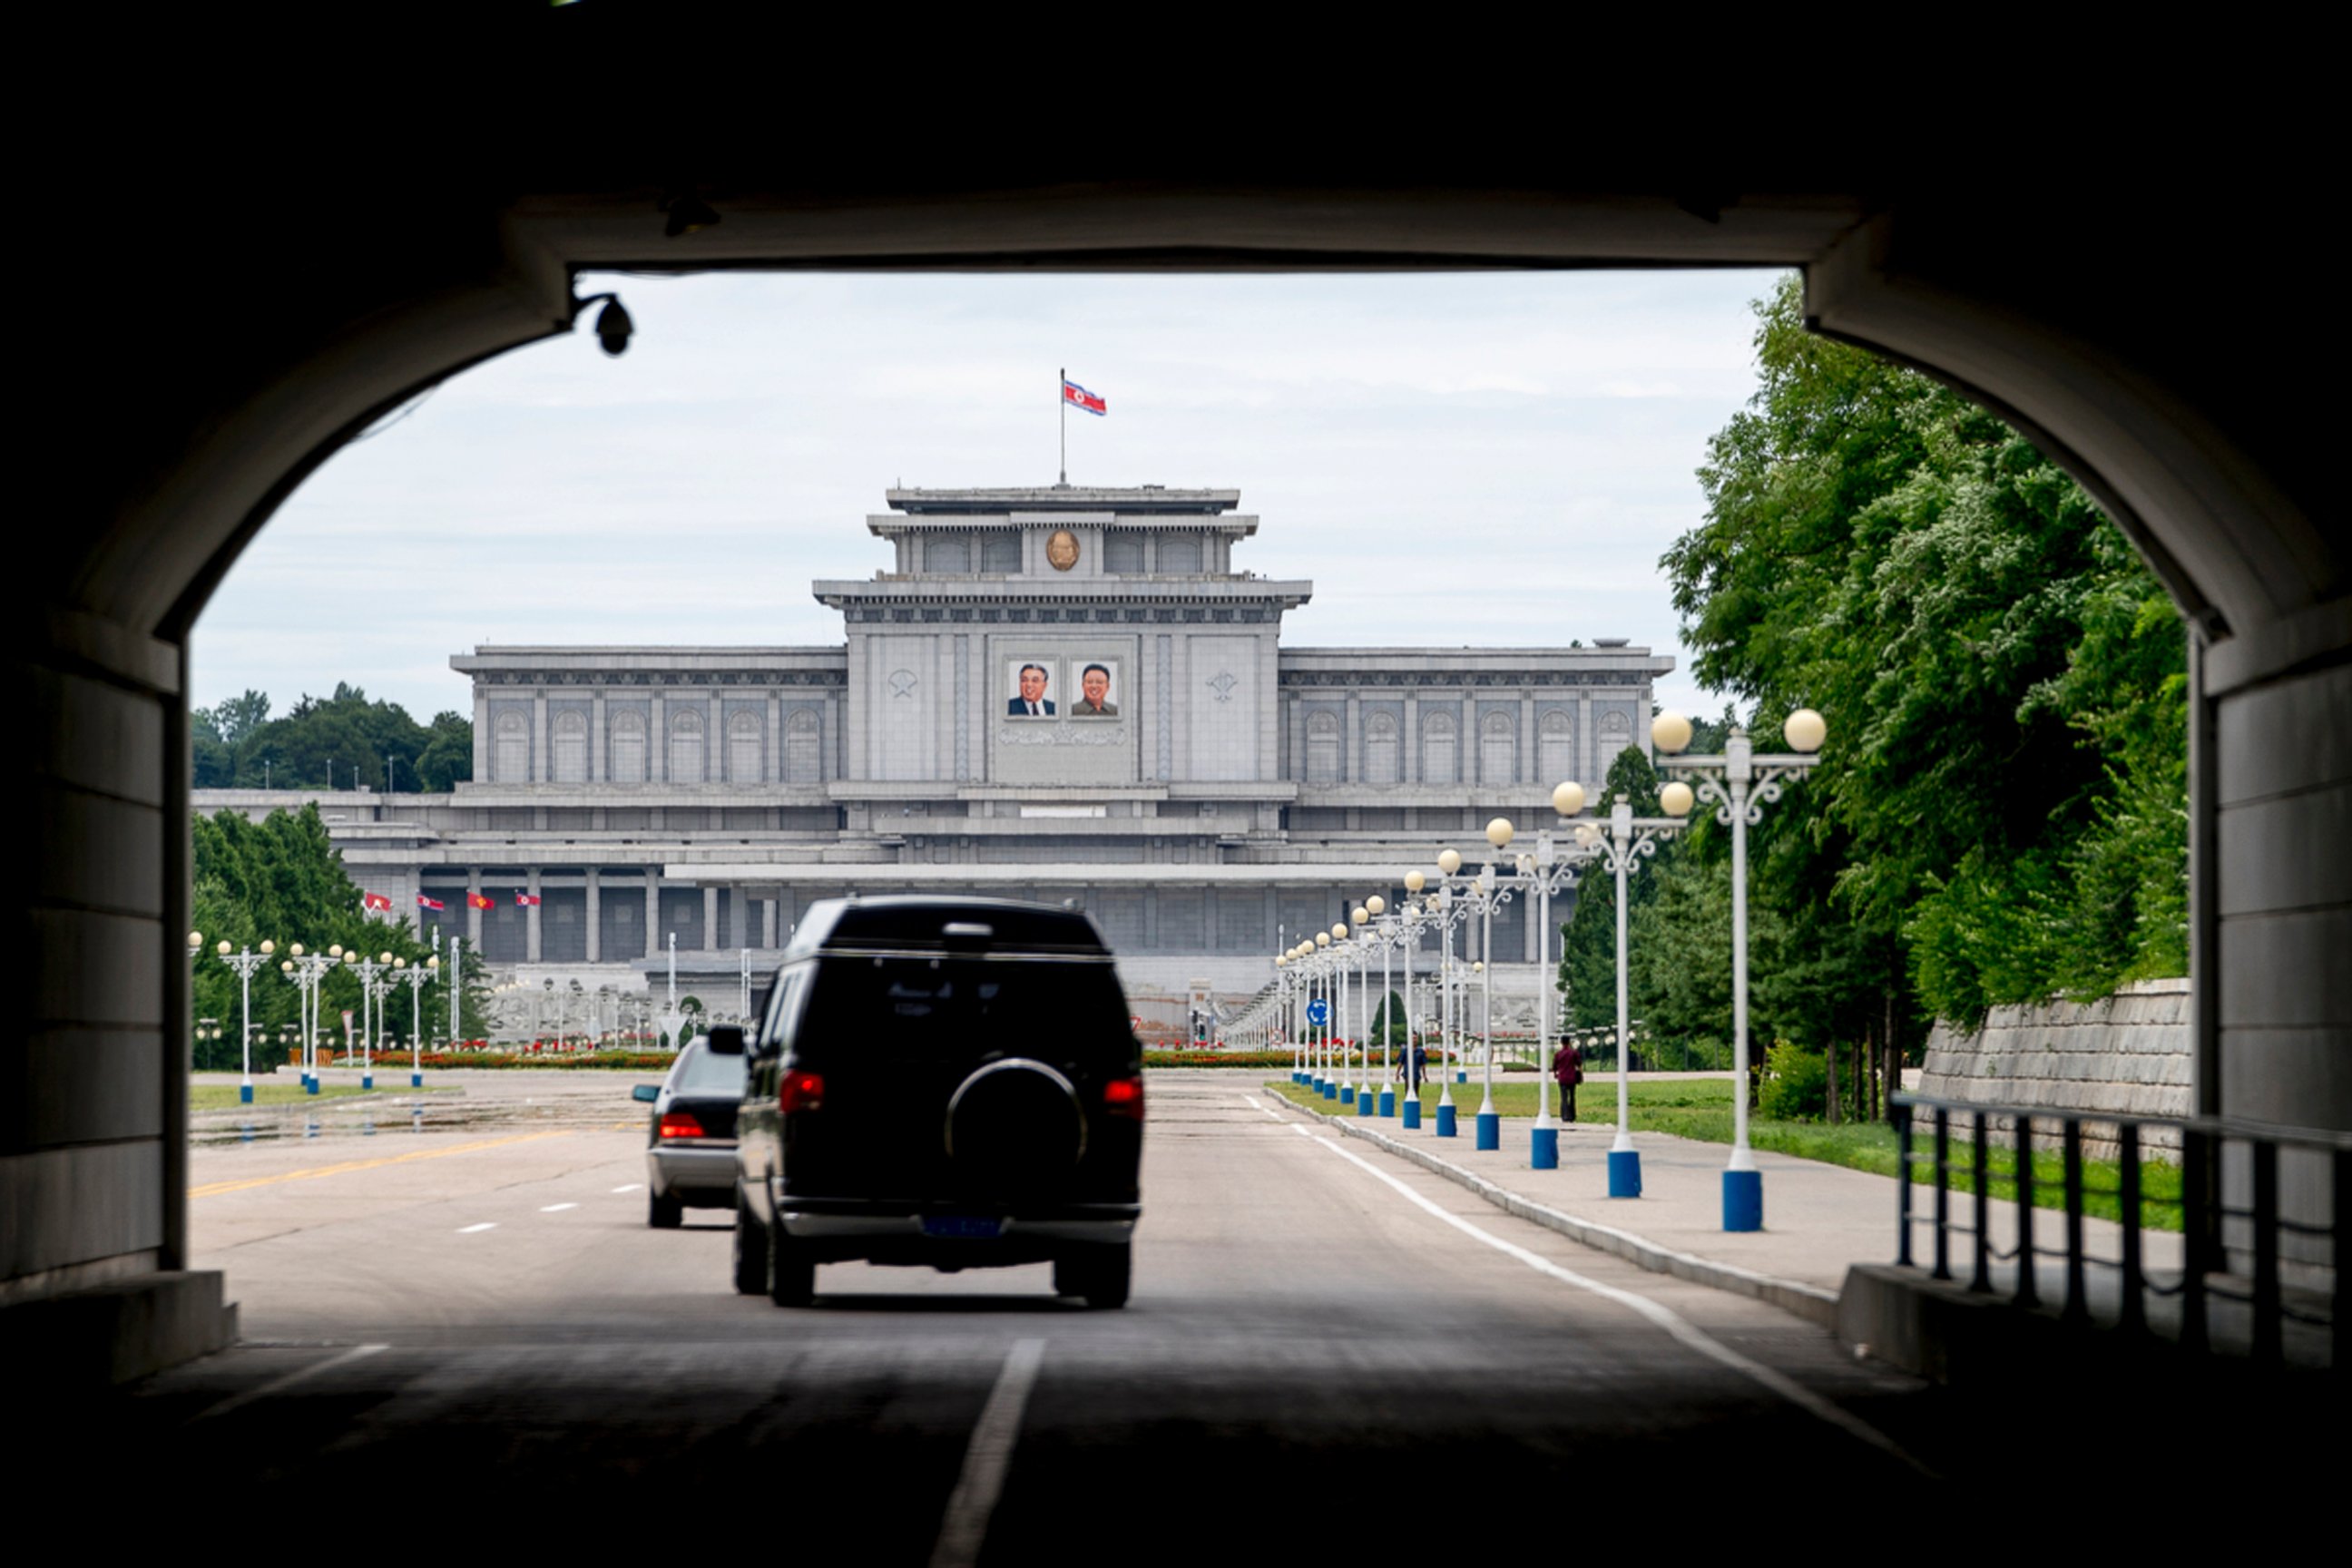 The motorcade carrying U.S. Secretary of State Mike Pompeo drives towards Kumsusan Palace of the Sun in Pyongyang, North Korea, Friday, July 6, 2018. Pompeo is on a trip traveling to North Korea, Japan, Vietnam, Abu Dhabi, and Brussels.